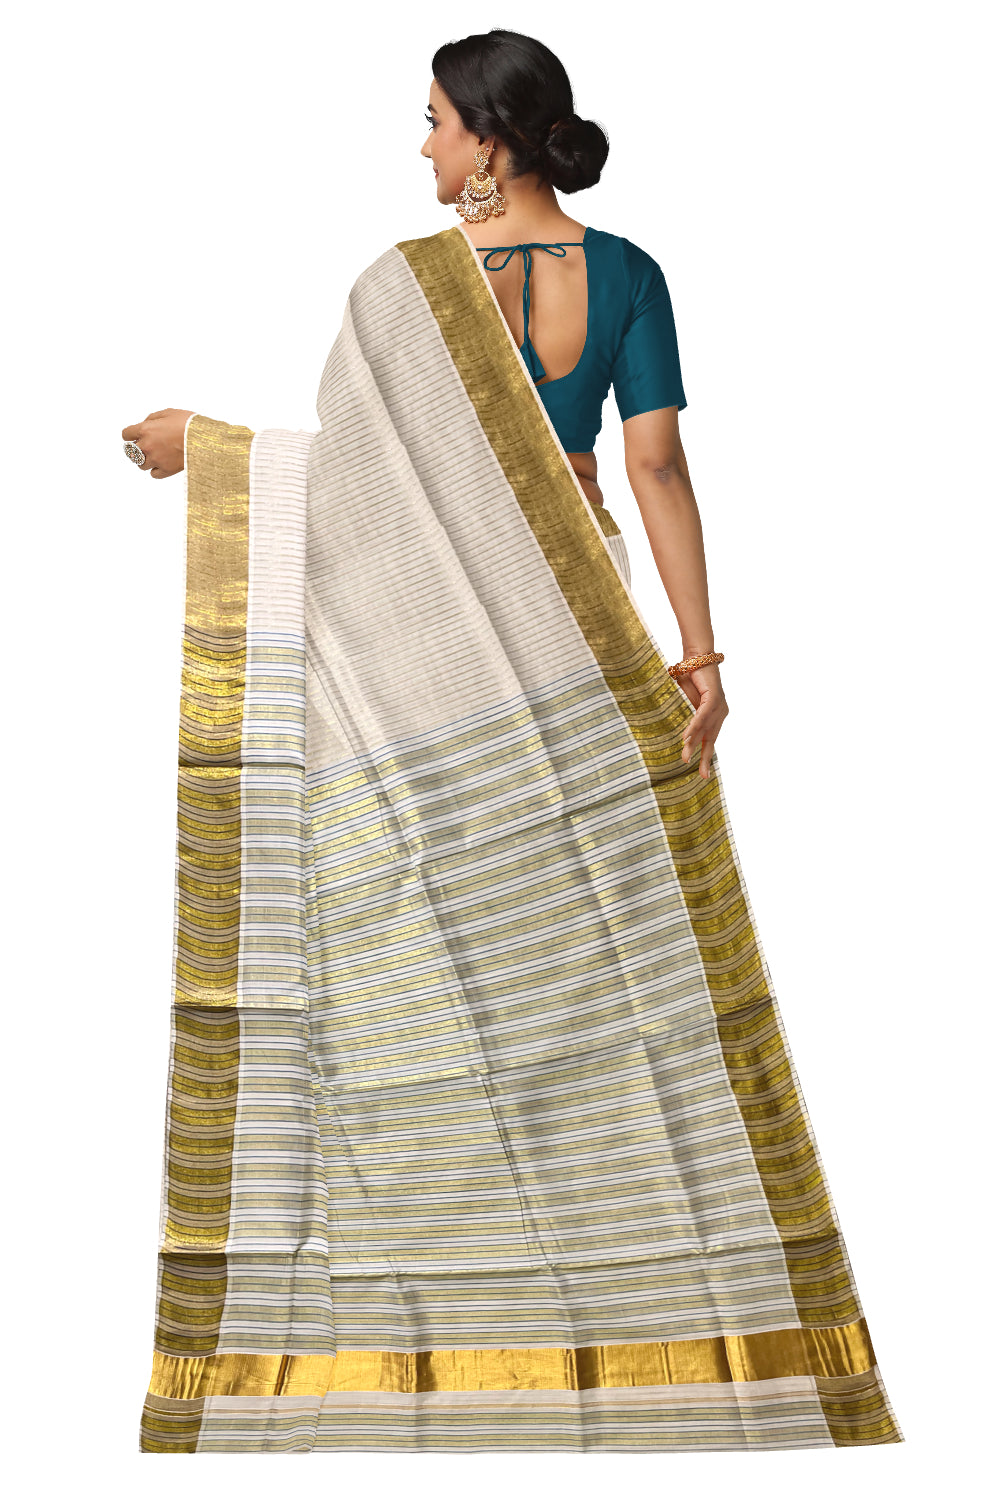 Pure Cotton Kerala Kasavu Saree with Lines Designs on Body and Blue Lines on Munthani